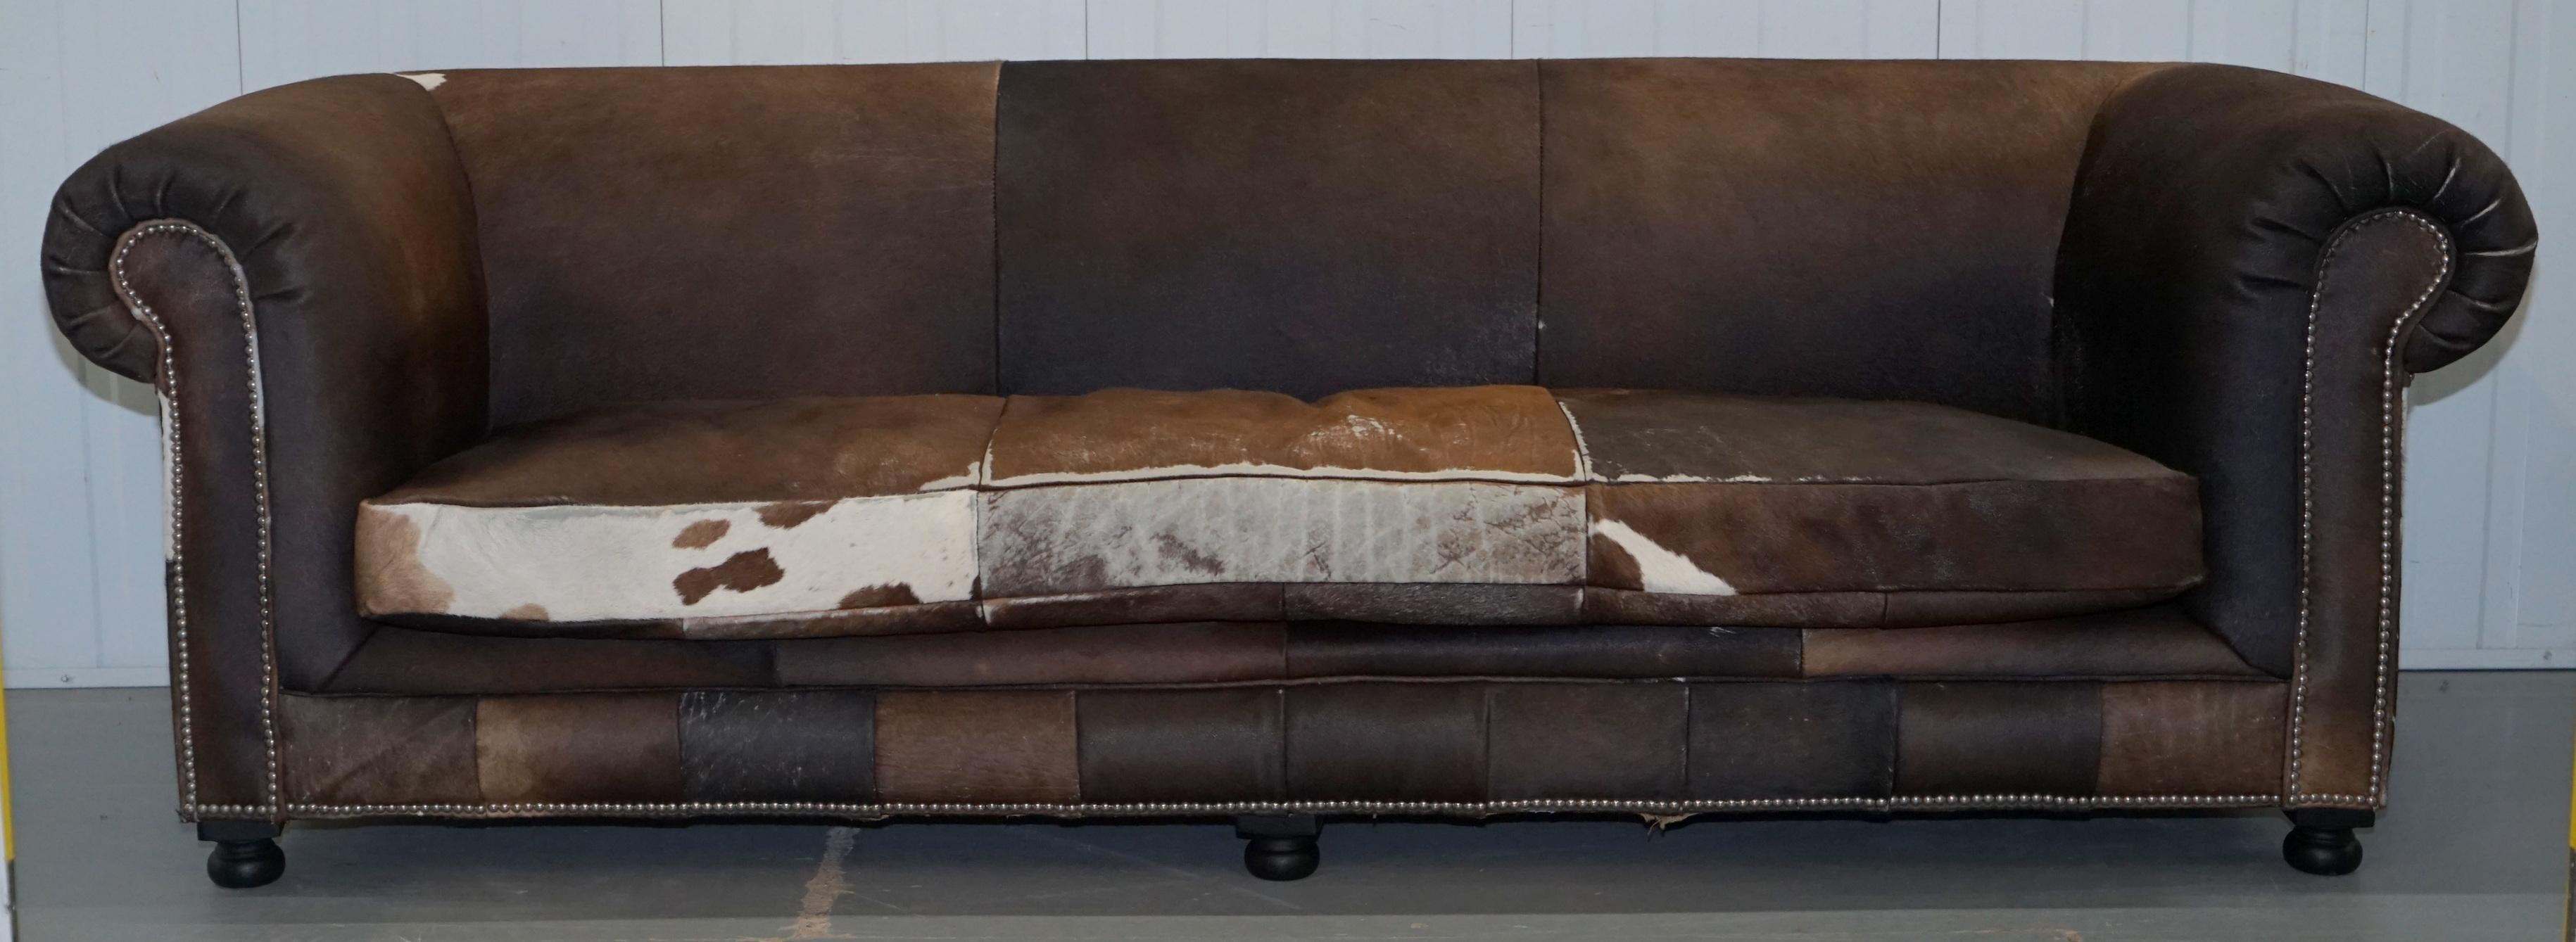 We are delighted to offer for sale this lovely large Halo Living Pony / cowhide sofa to seat up to 4 people

A good looking well made and decorative sofa, the pony hide upholstery is very on trend and offers a very soft touch and cool twist on an